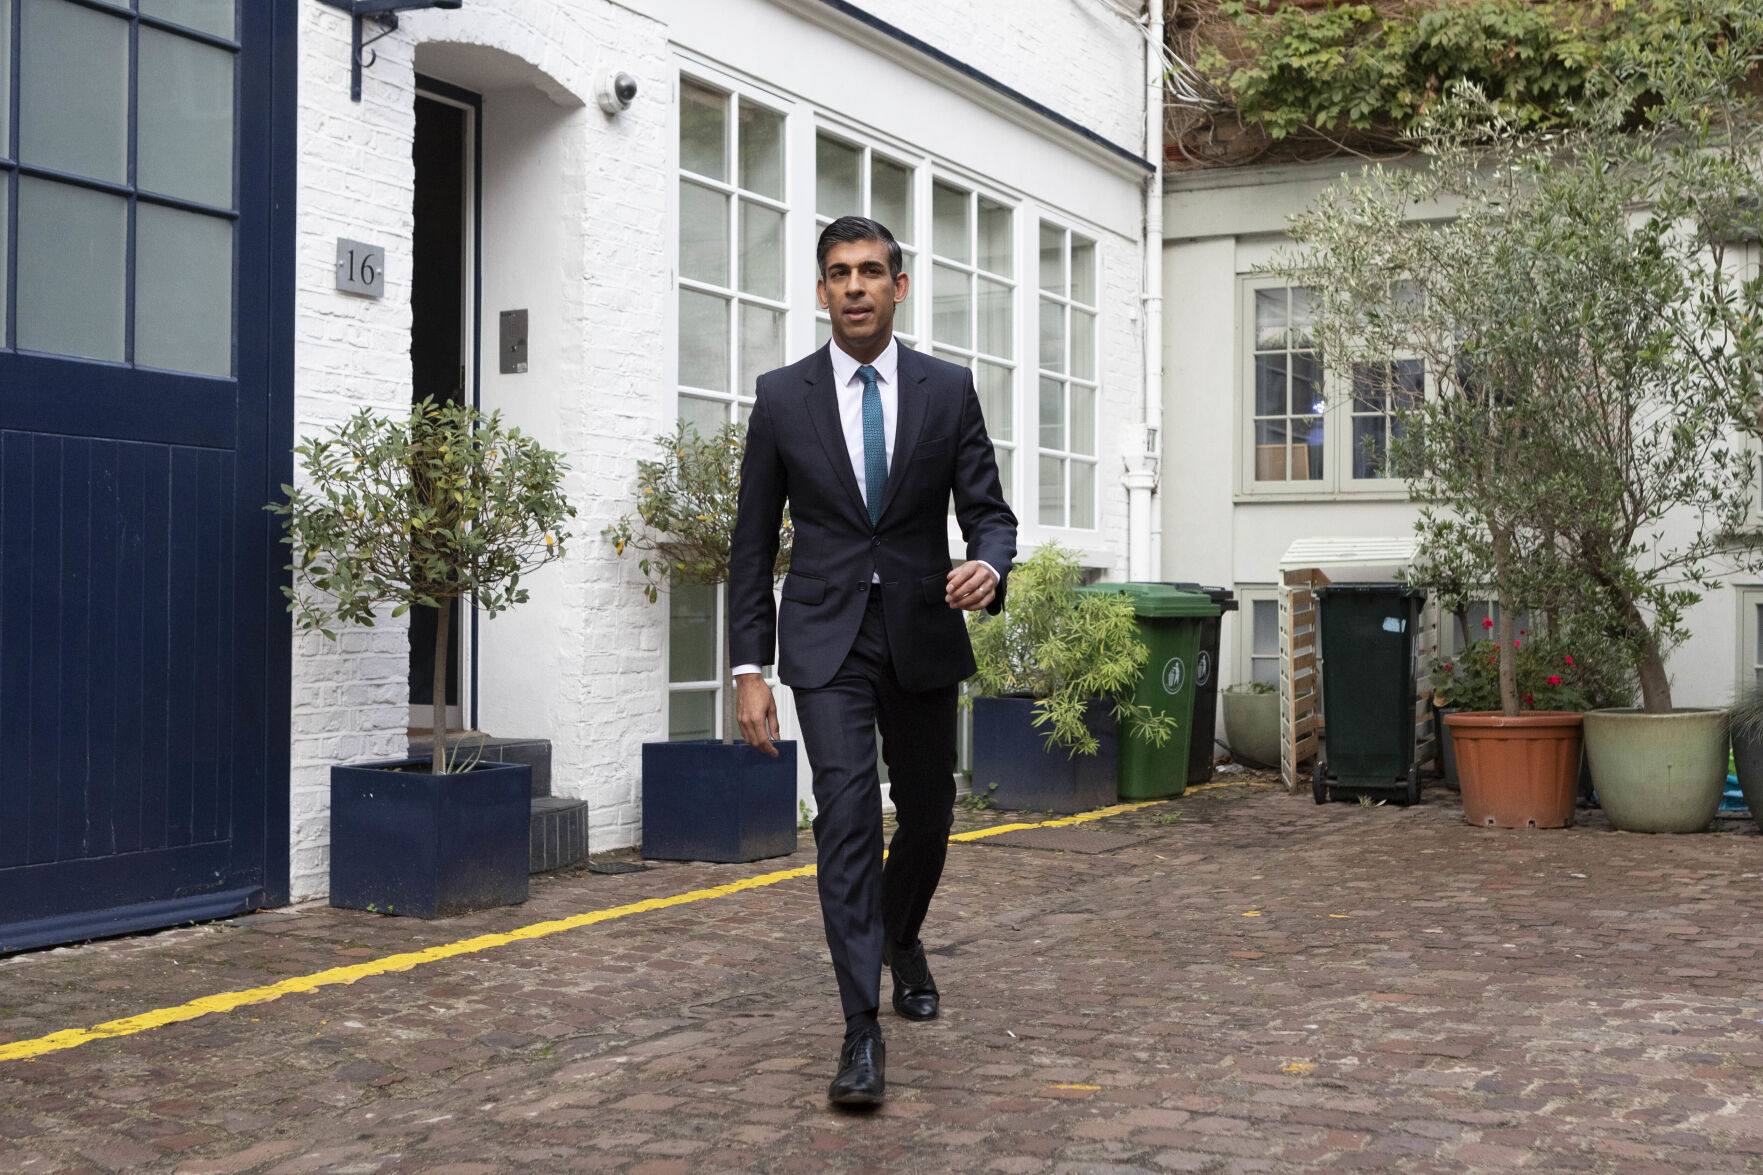 <p>Rishi Sunak outside his home in London, following the resignation of Liz Truss as Prime Minister, Friday Oct. 21, 2022. British Prime Minister Liz Truss resigned Thursday, bowing to the inevitable after a tumultuous, short-lived term in which her policies triggered turmoil in financial markets and a rebellion in her party that obliterated her authority. (Beresford Hodge/PA via AP)</p>   PHOTO CREDIT: Beresford Hodge - foreign subscriber, PA